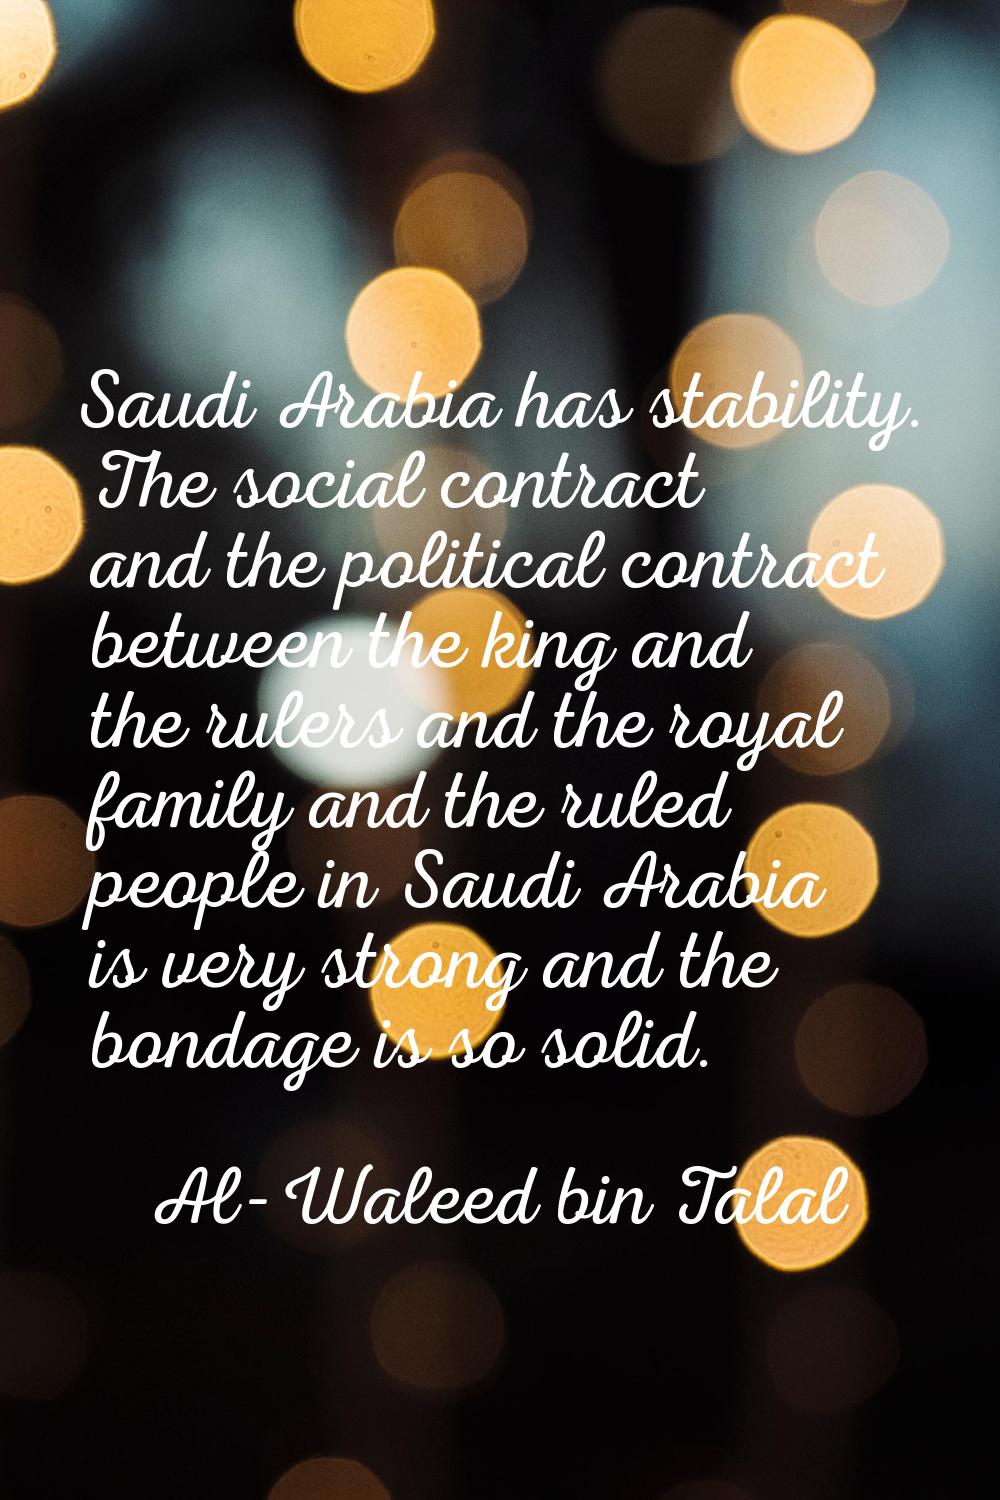 Saudi Arabia has stability. The social contract and the political contract between the king and the